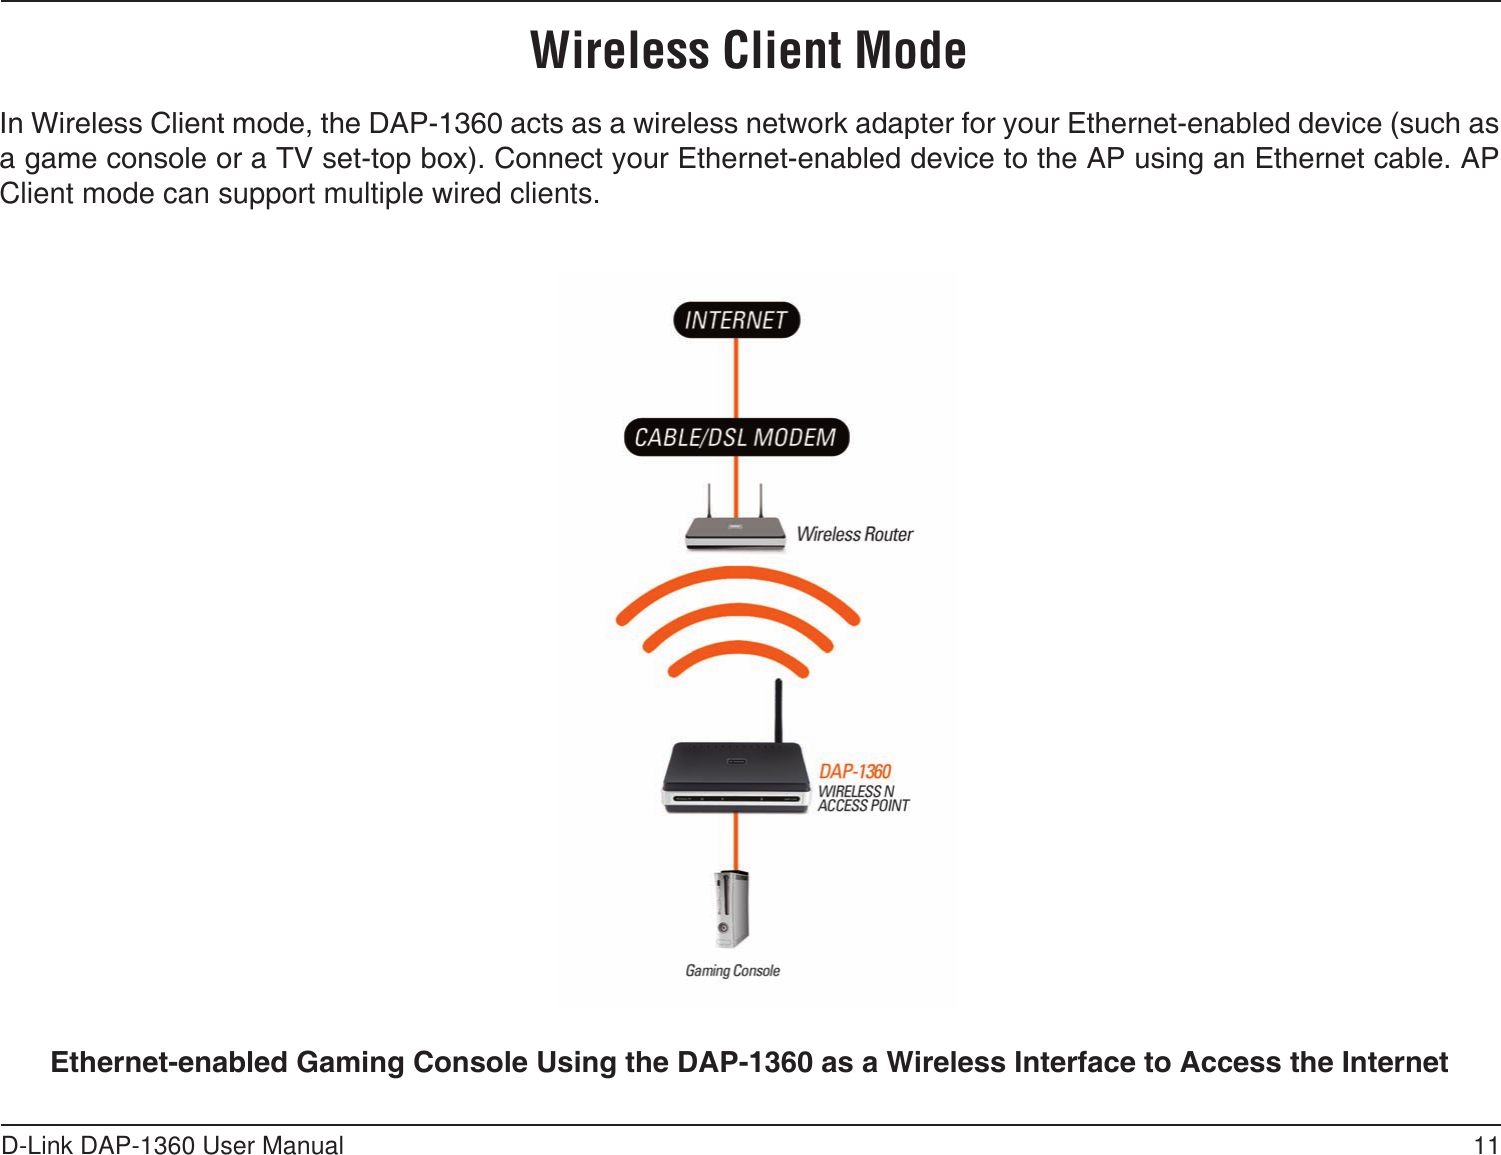 11D-Link DAP-1360 User ManualWireless Client ModeIn Wireless Client mode, the DAP-1360 acts as a wireless network adapter for your Ethernet-enabled device (such as a game console or a TV set-top box). Connect your Ethernet-enabled device to the AP using an Ethernet cable. AP Client mode can support multiple wired clients. Ethernet-enabled Gaming Console Using the DAP-1360 as a Wireless Interface to Access the Internet